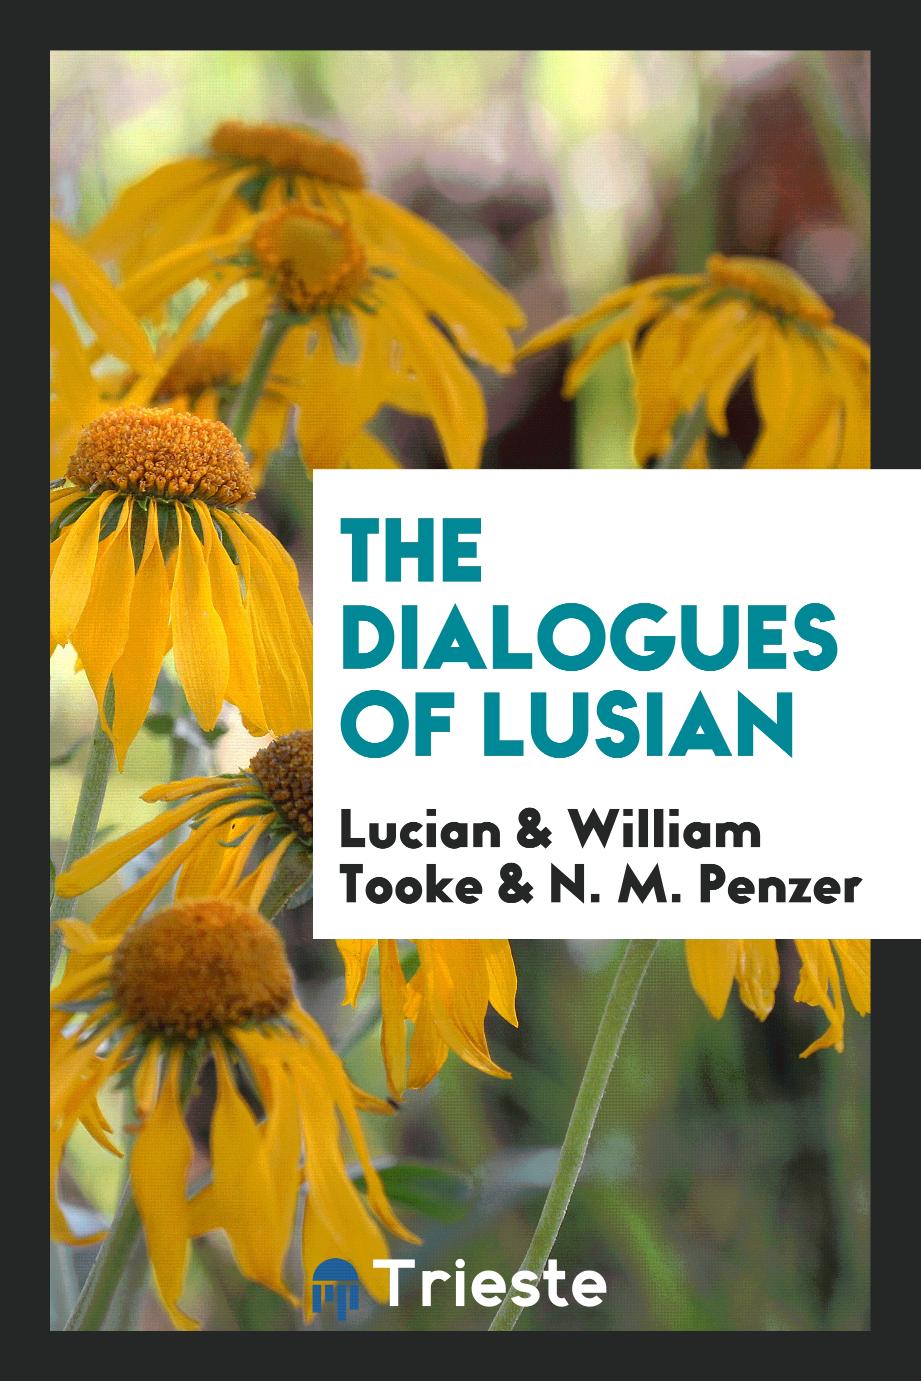 The Dialogues of Lusian